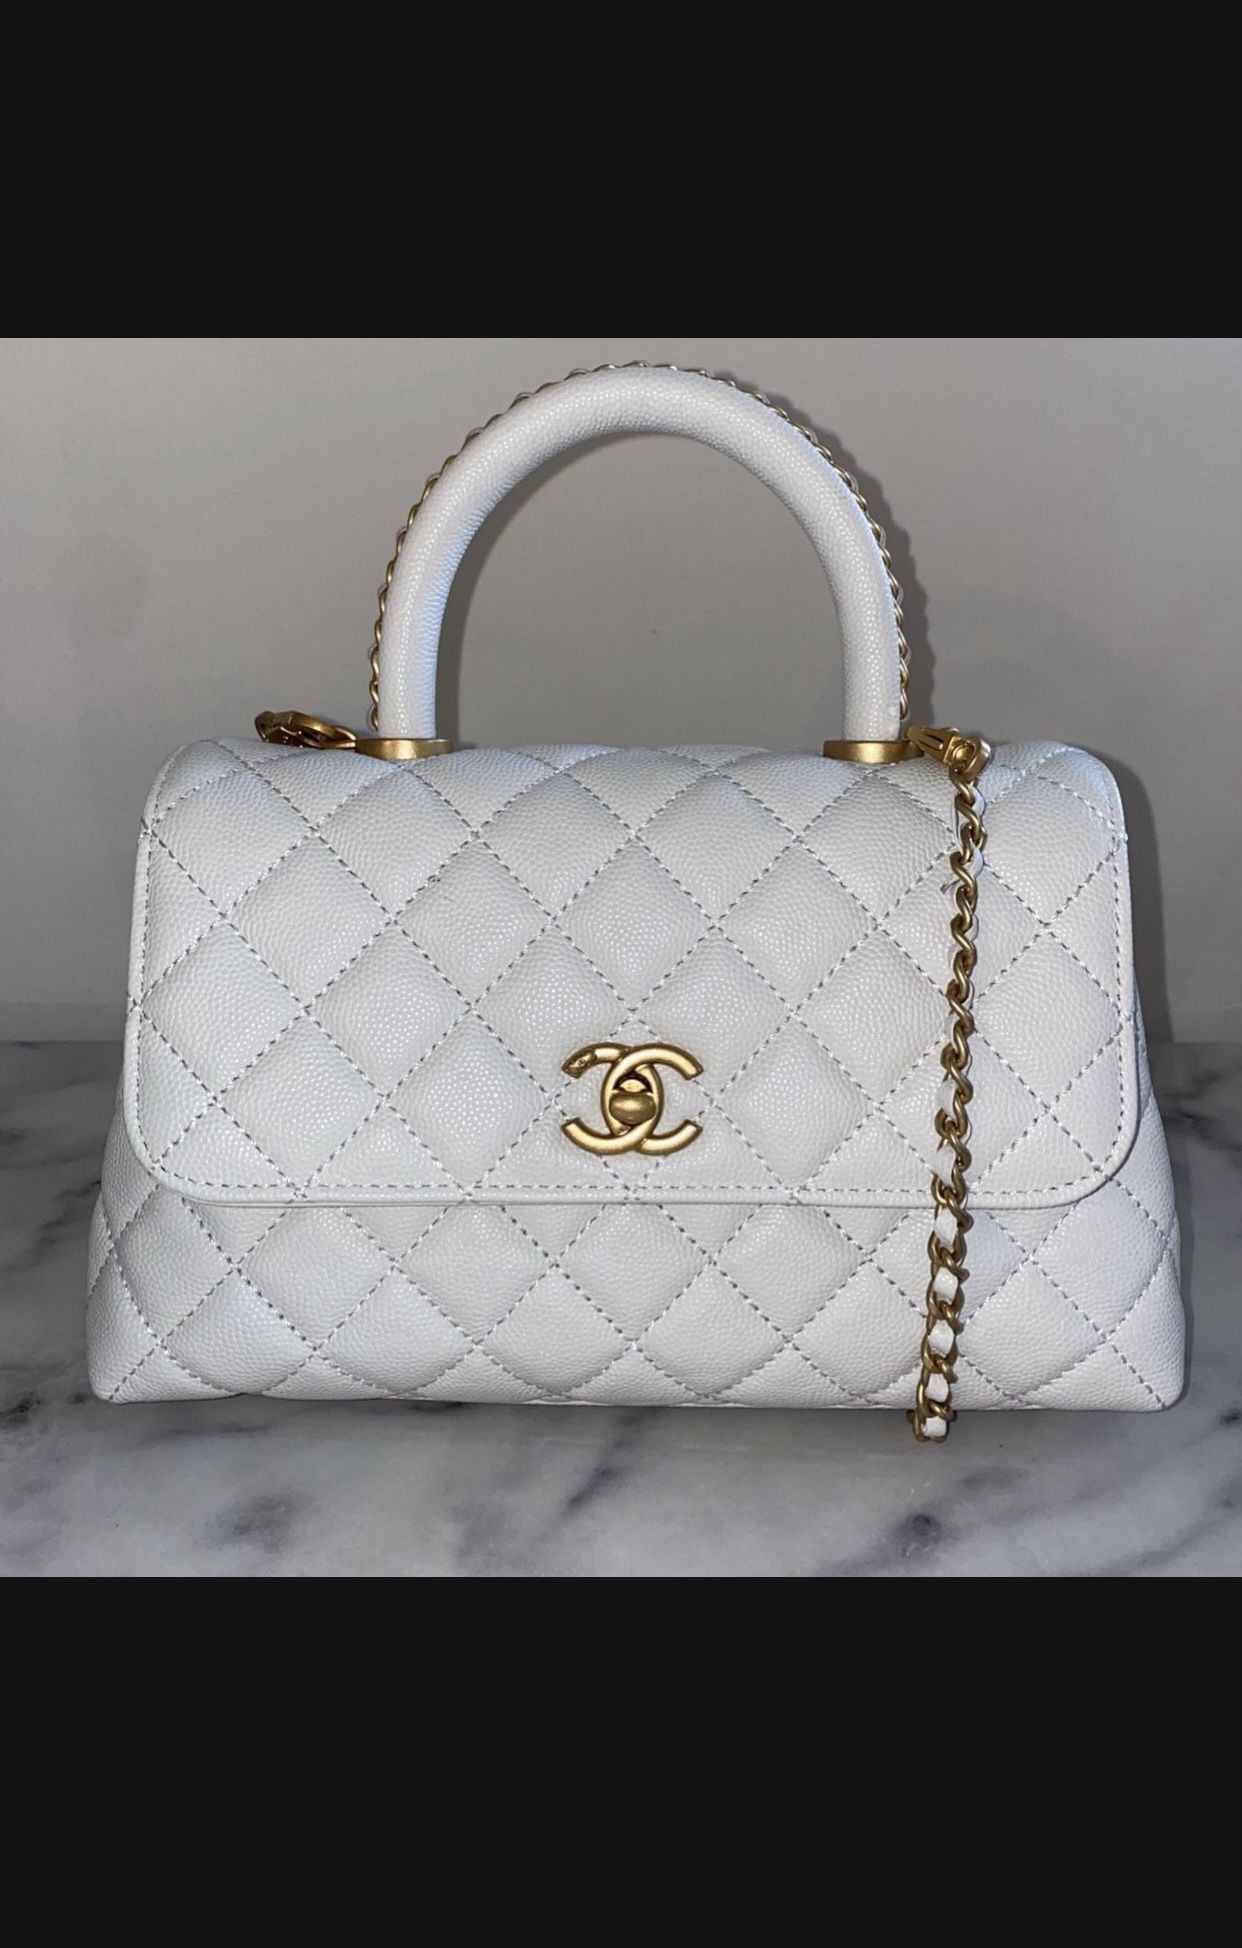 CC Chanel White Bag With Gold Hardware